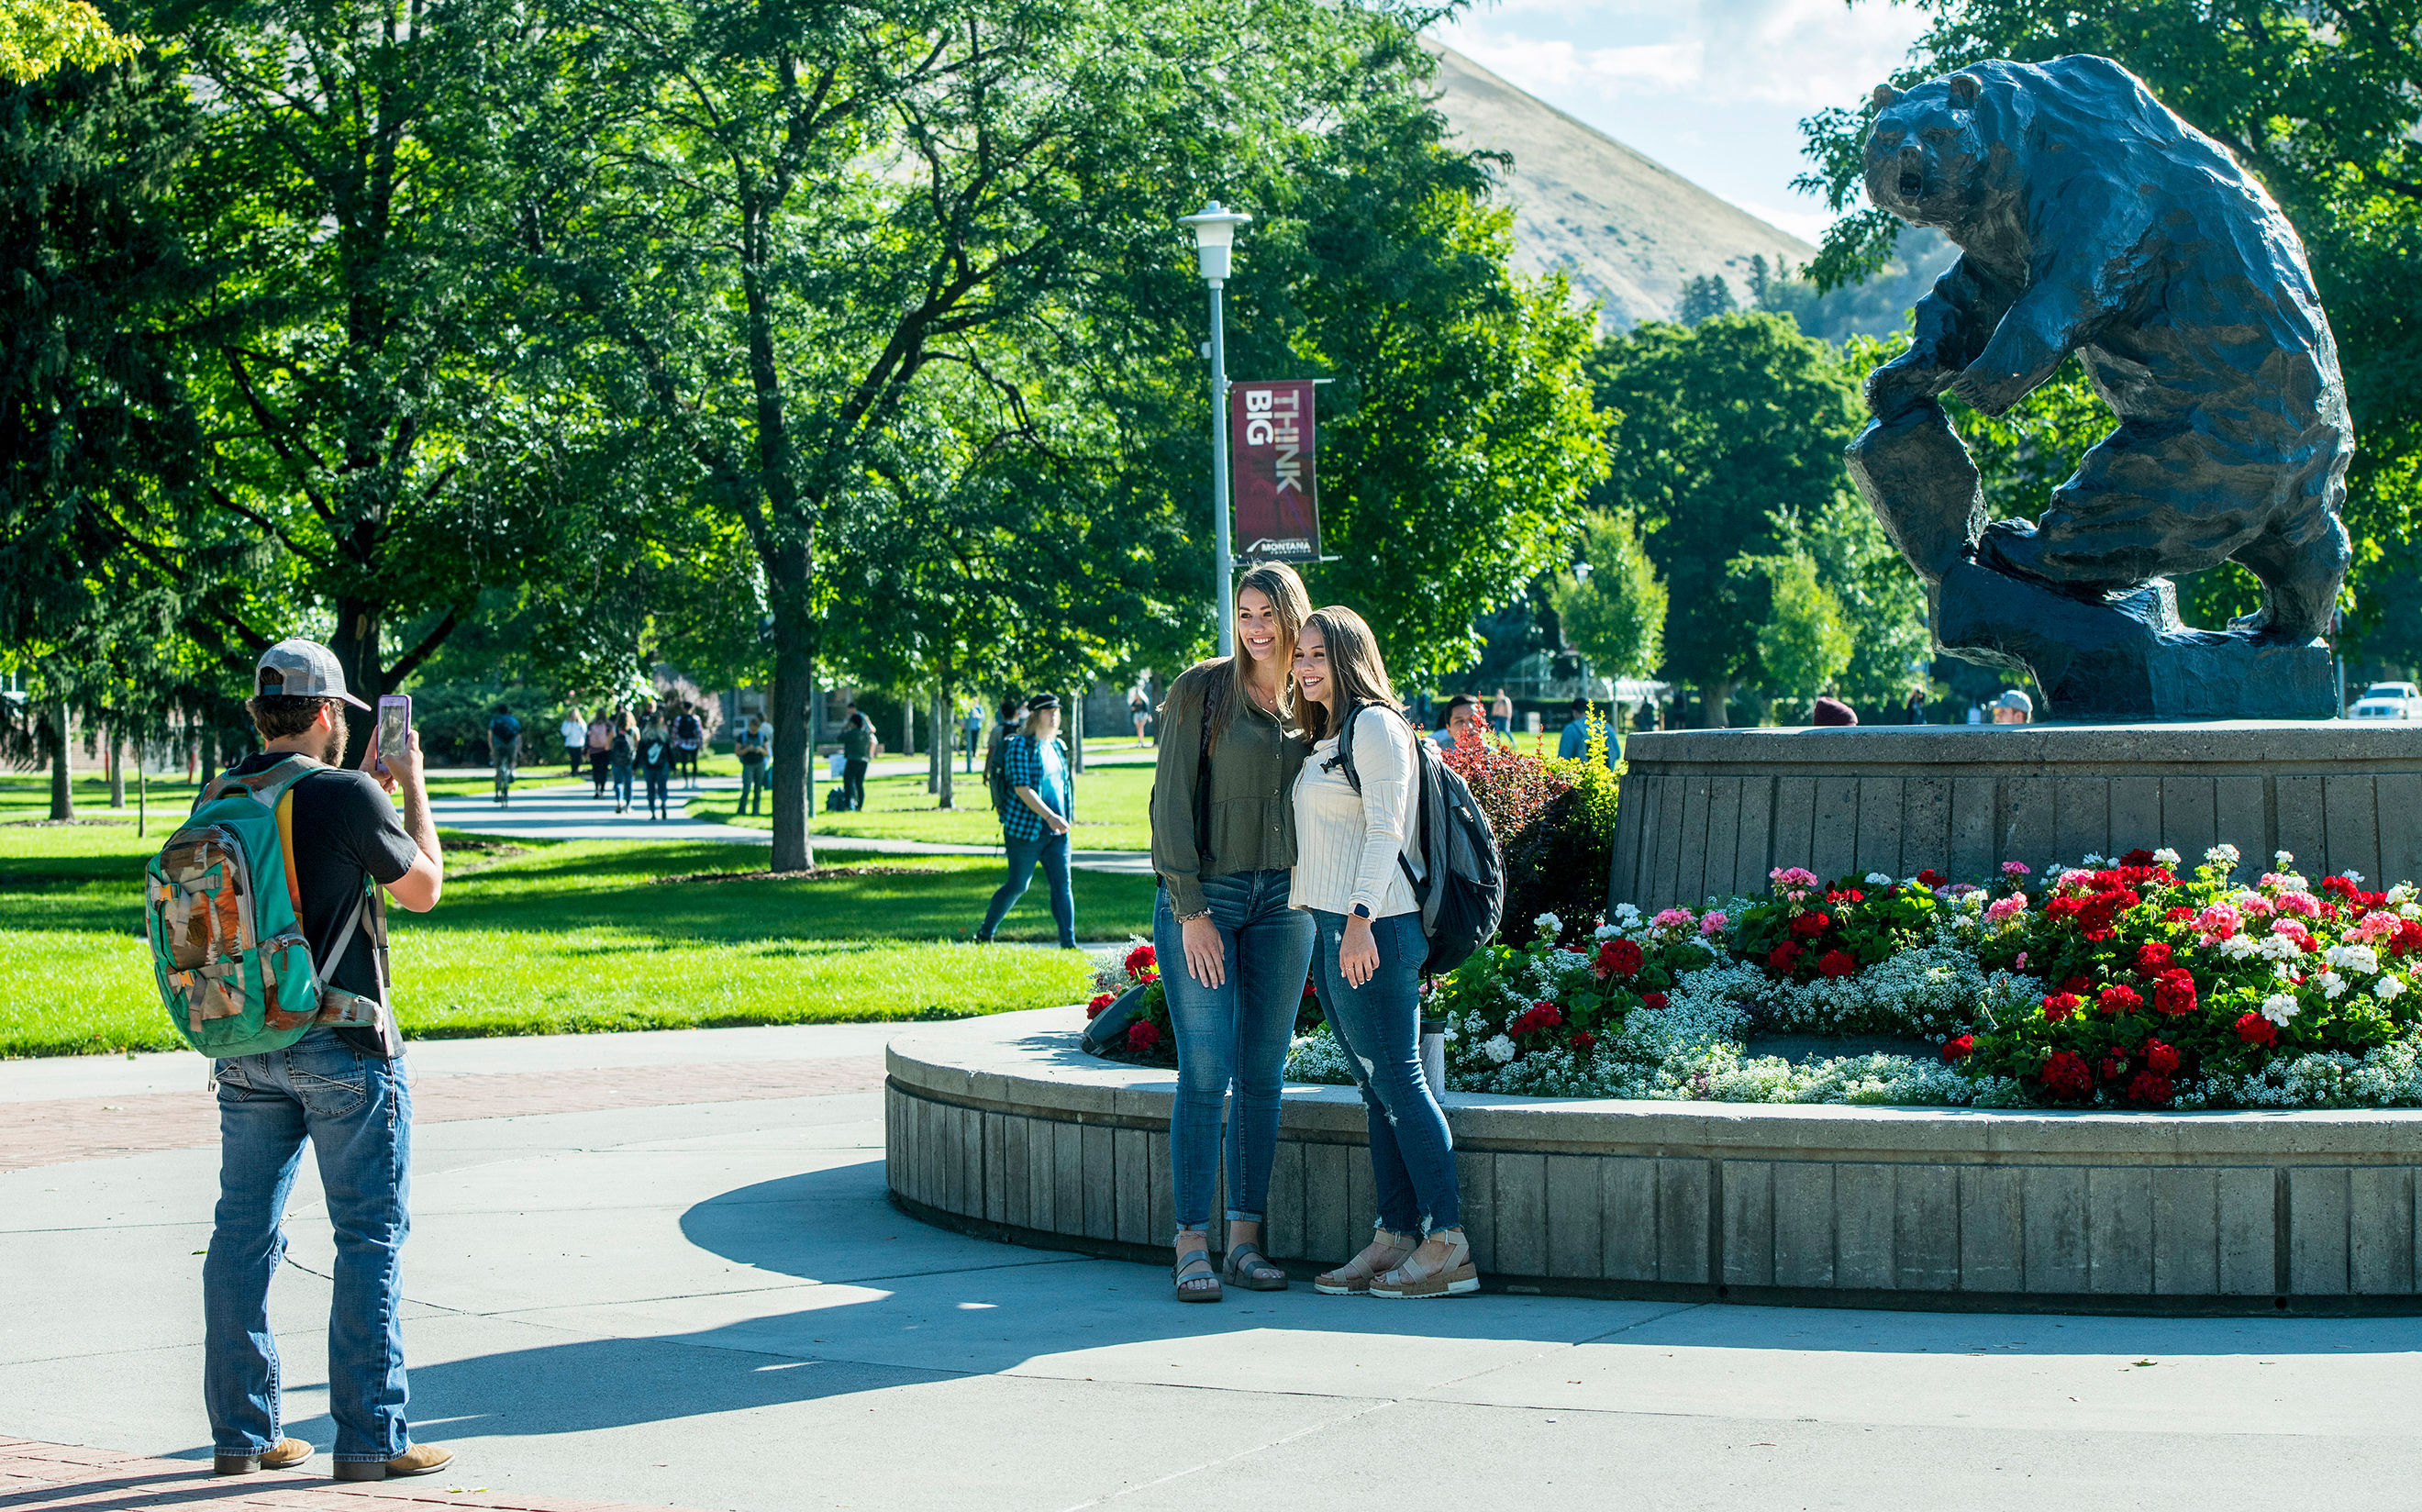 Students take a photo in front of the Grizzly bear Statue